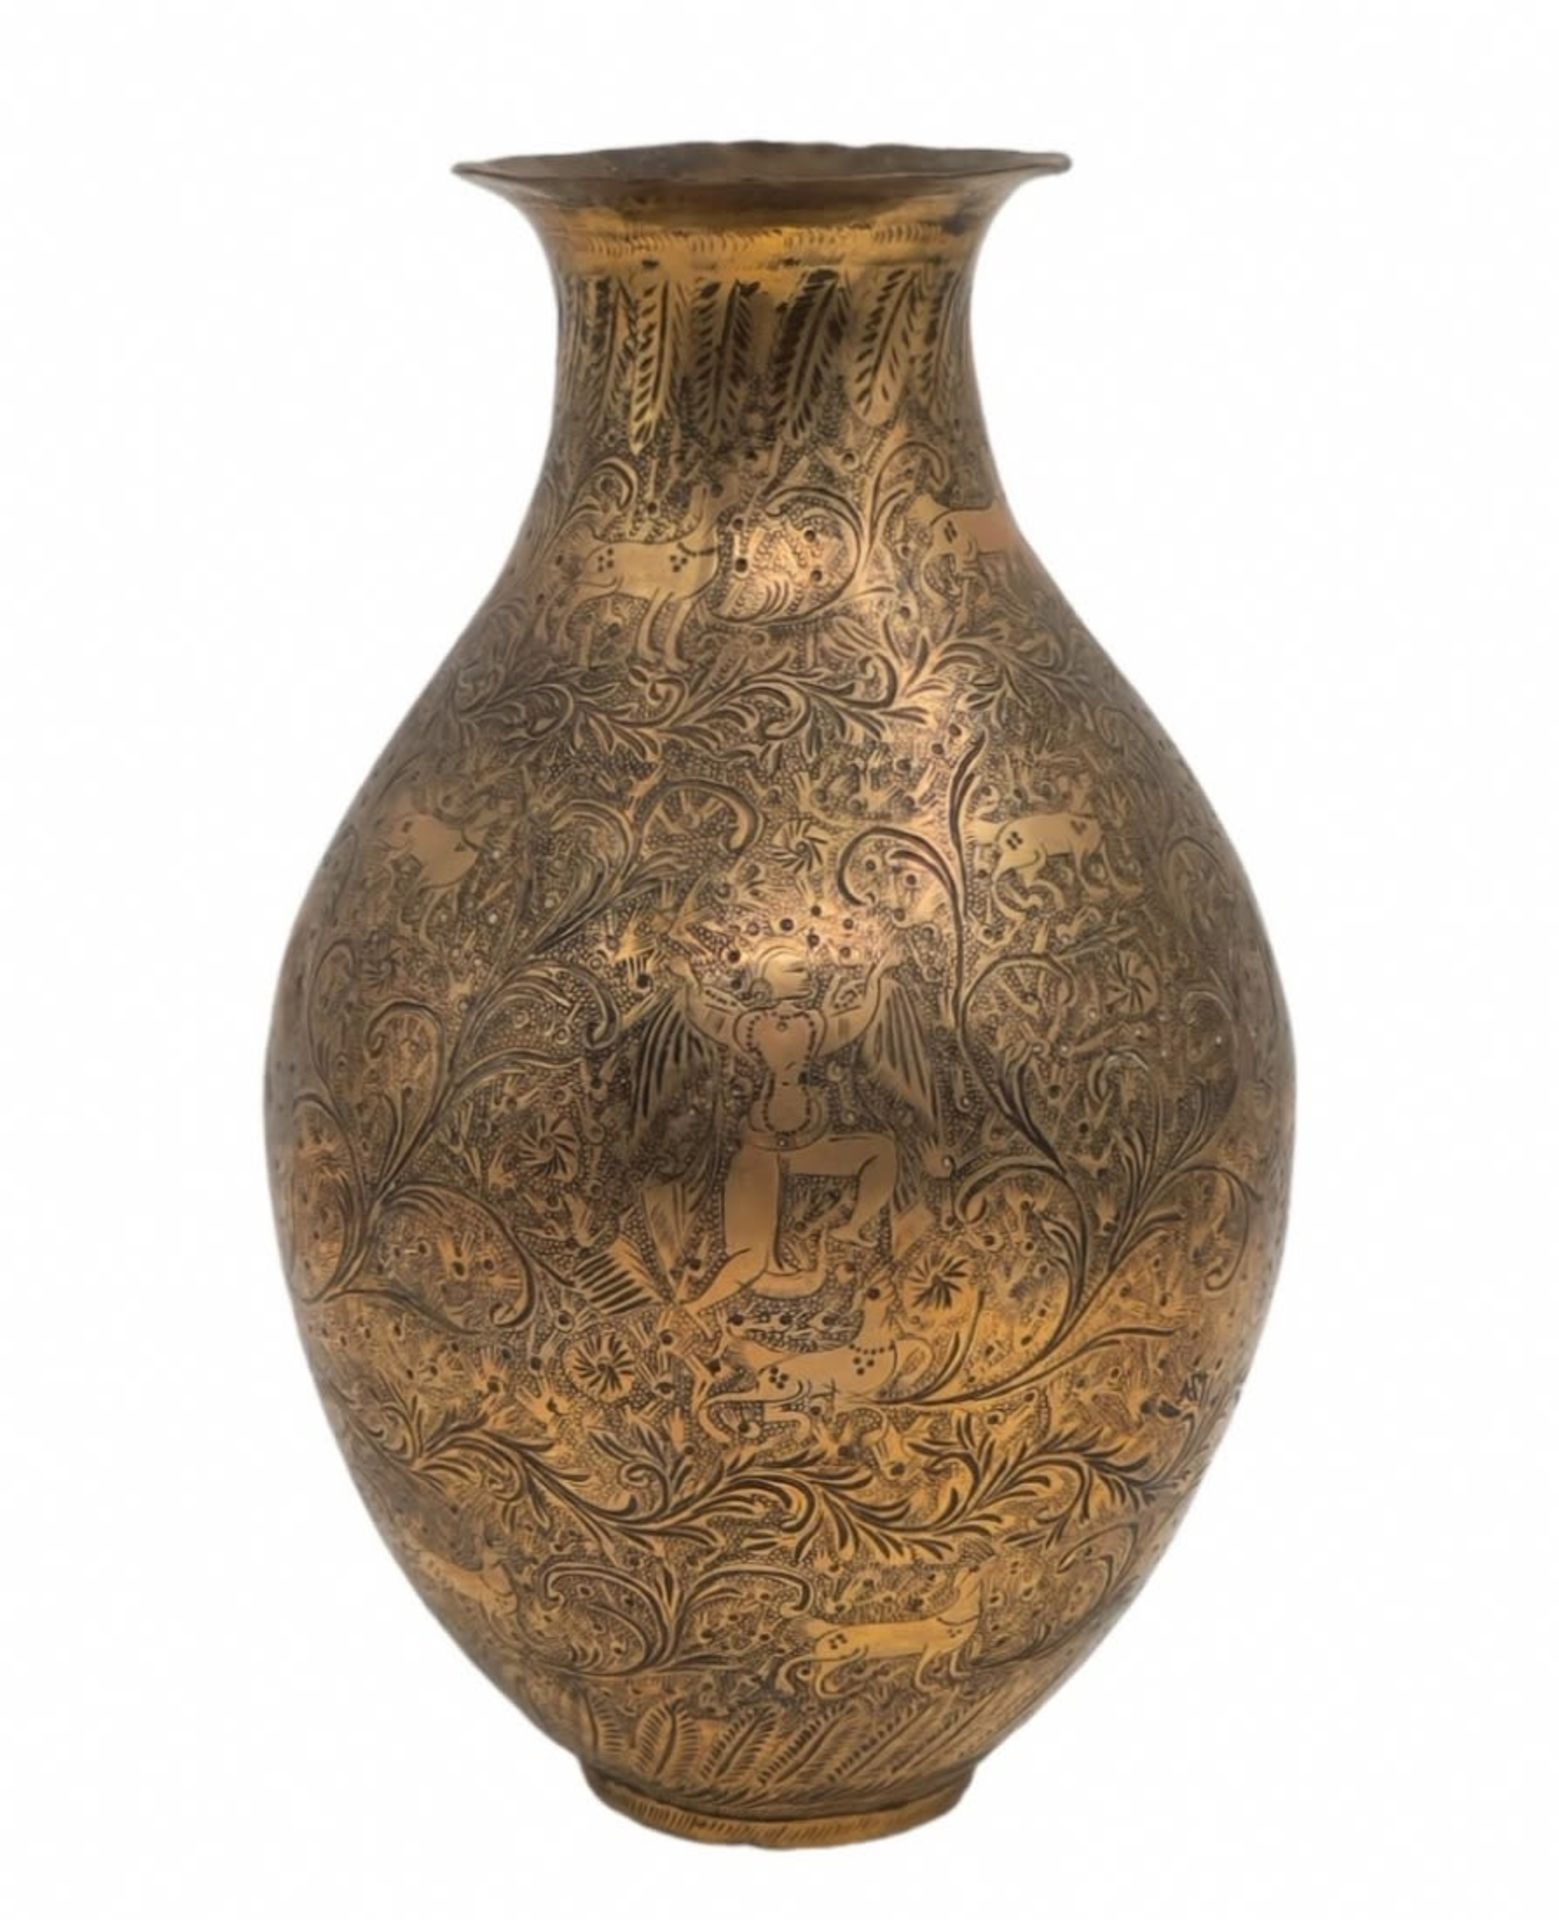 An antique Islamic urn from Mughal Empire period, made of brass, richly decorated with hand-engraved - Image 2 of 4